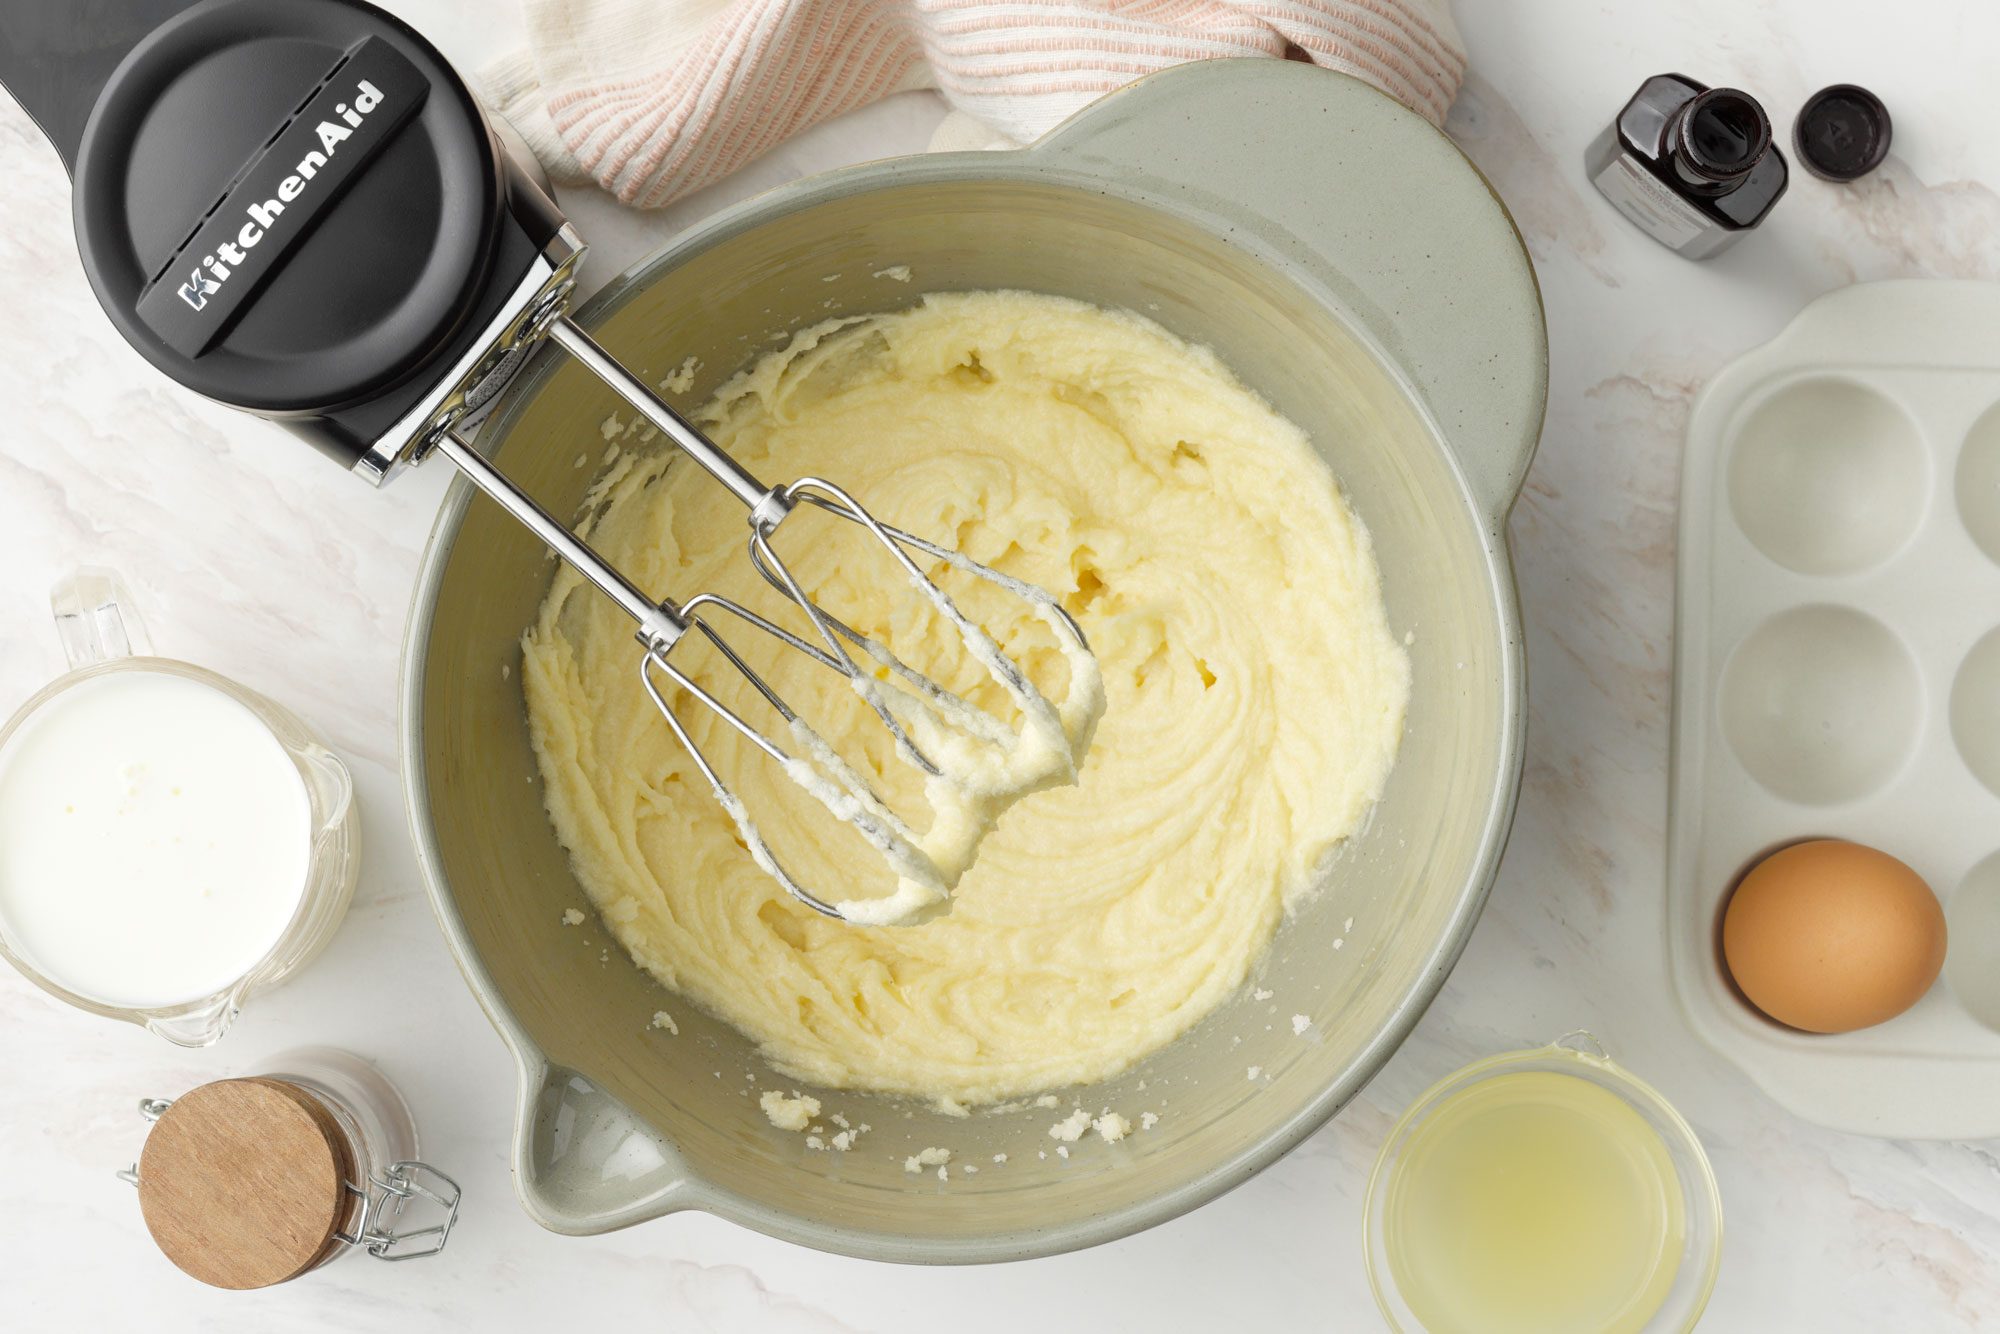 Use hand mixer to butter the cream and sugar